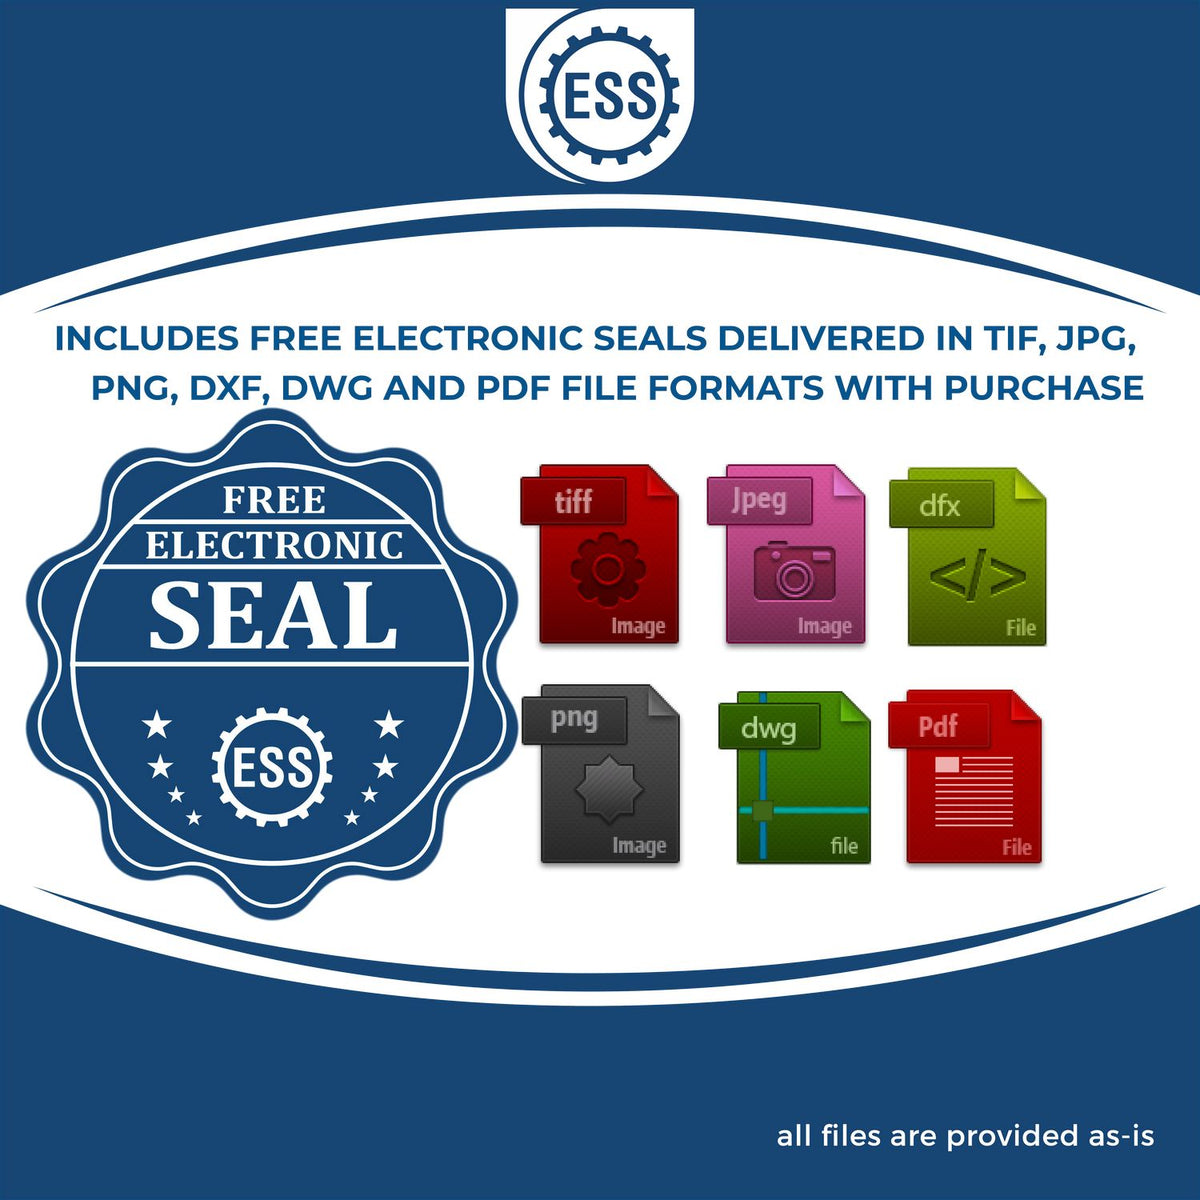 An infographic for the free electronic seal for the Soft Maryland Professional Engineer Seal illustrating the different file type icons such as DXF, DWG, TIF, JPG and PNG.